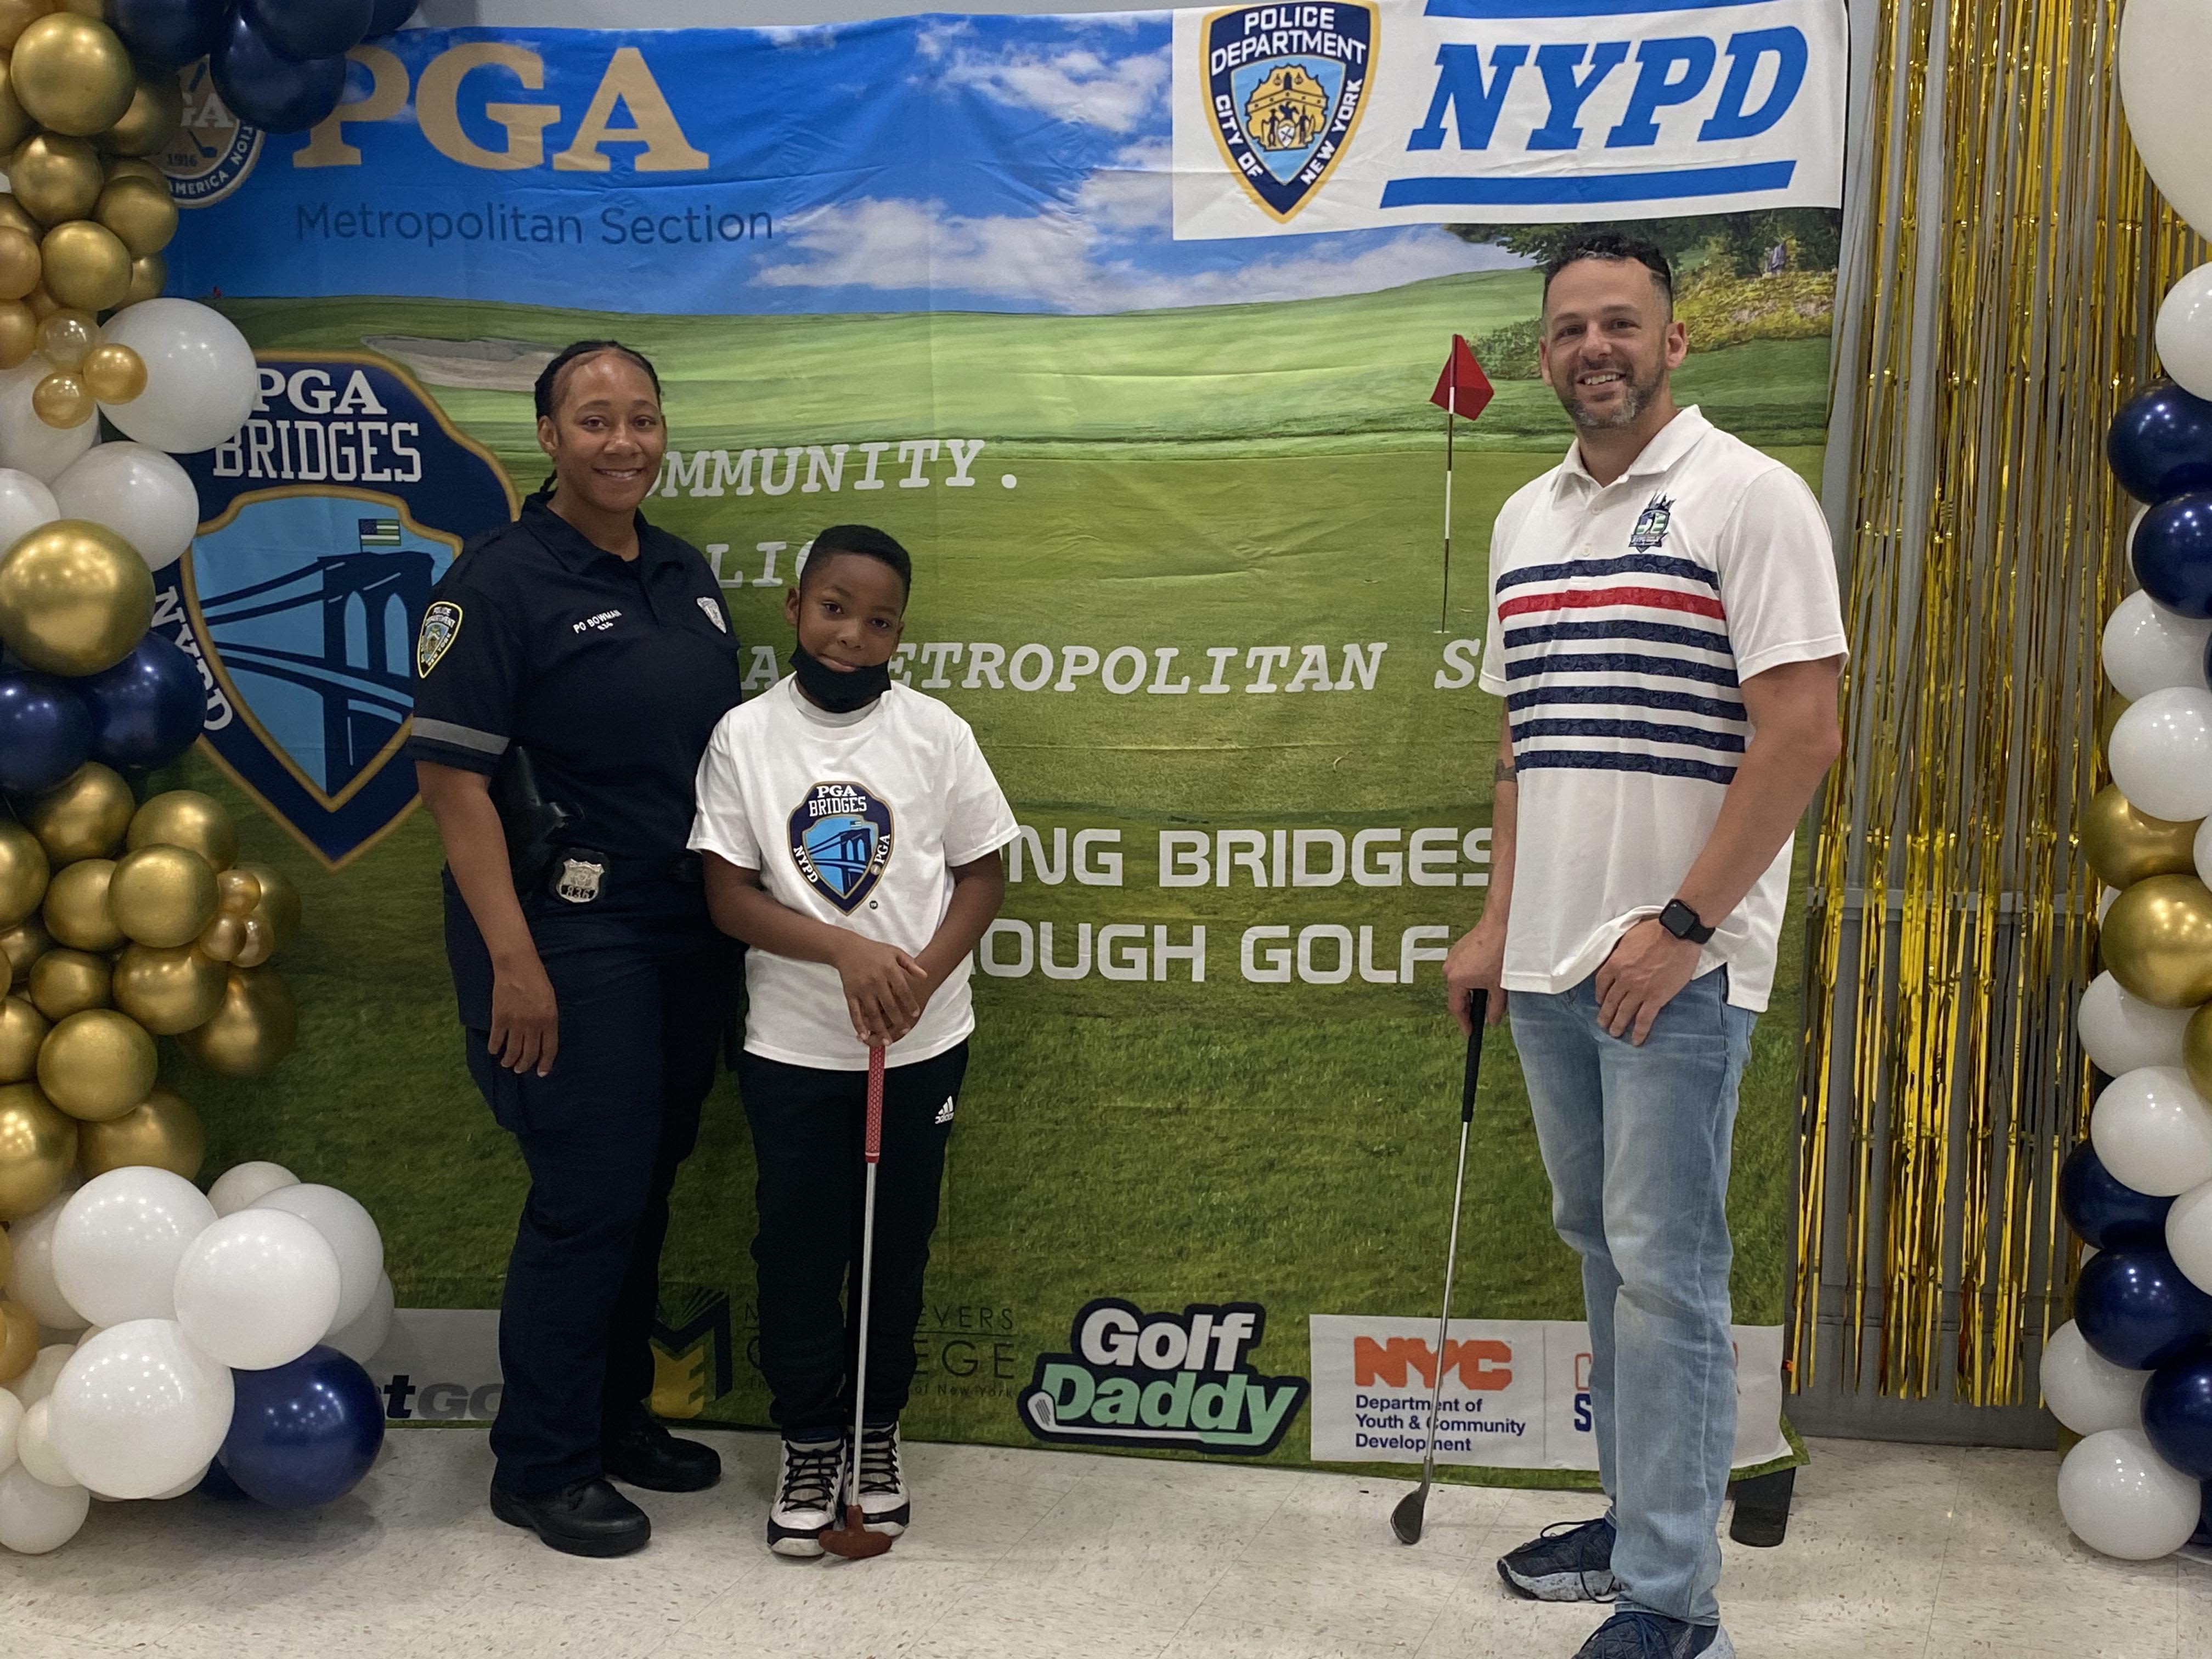 Vincenzo Rallo, PGA, at the Met PGA Bridges event with a participant and fellow NYPD member.